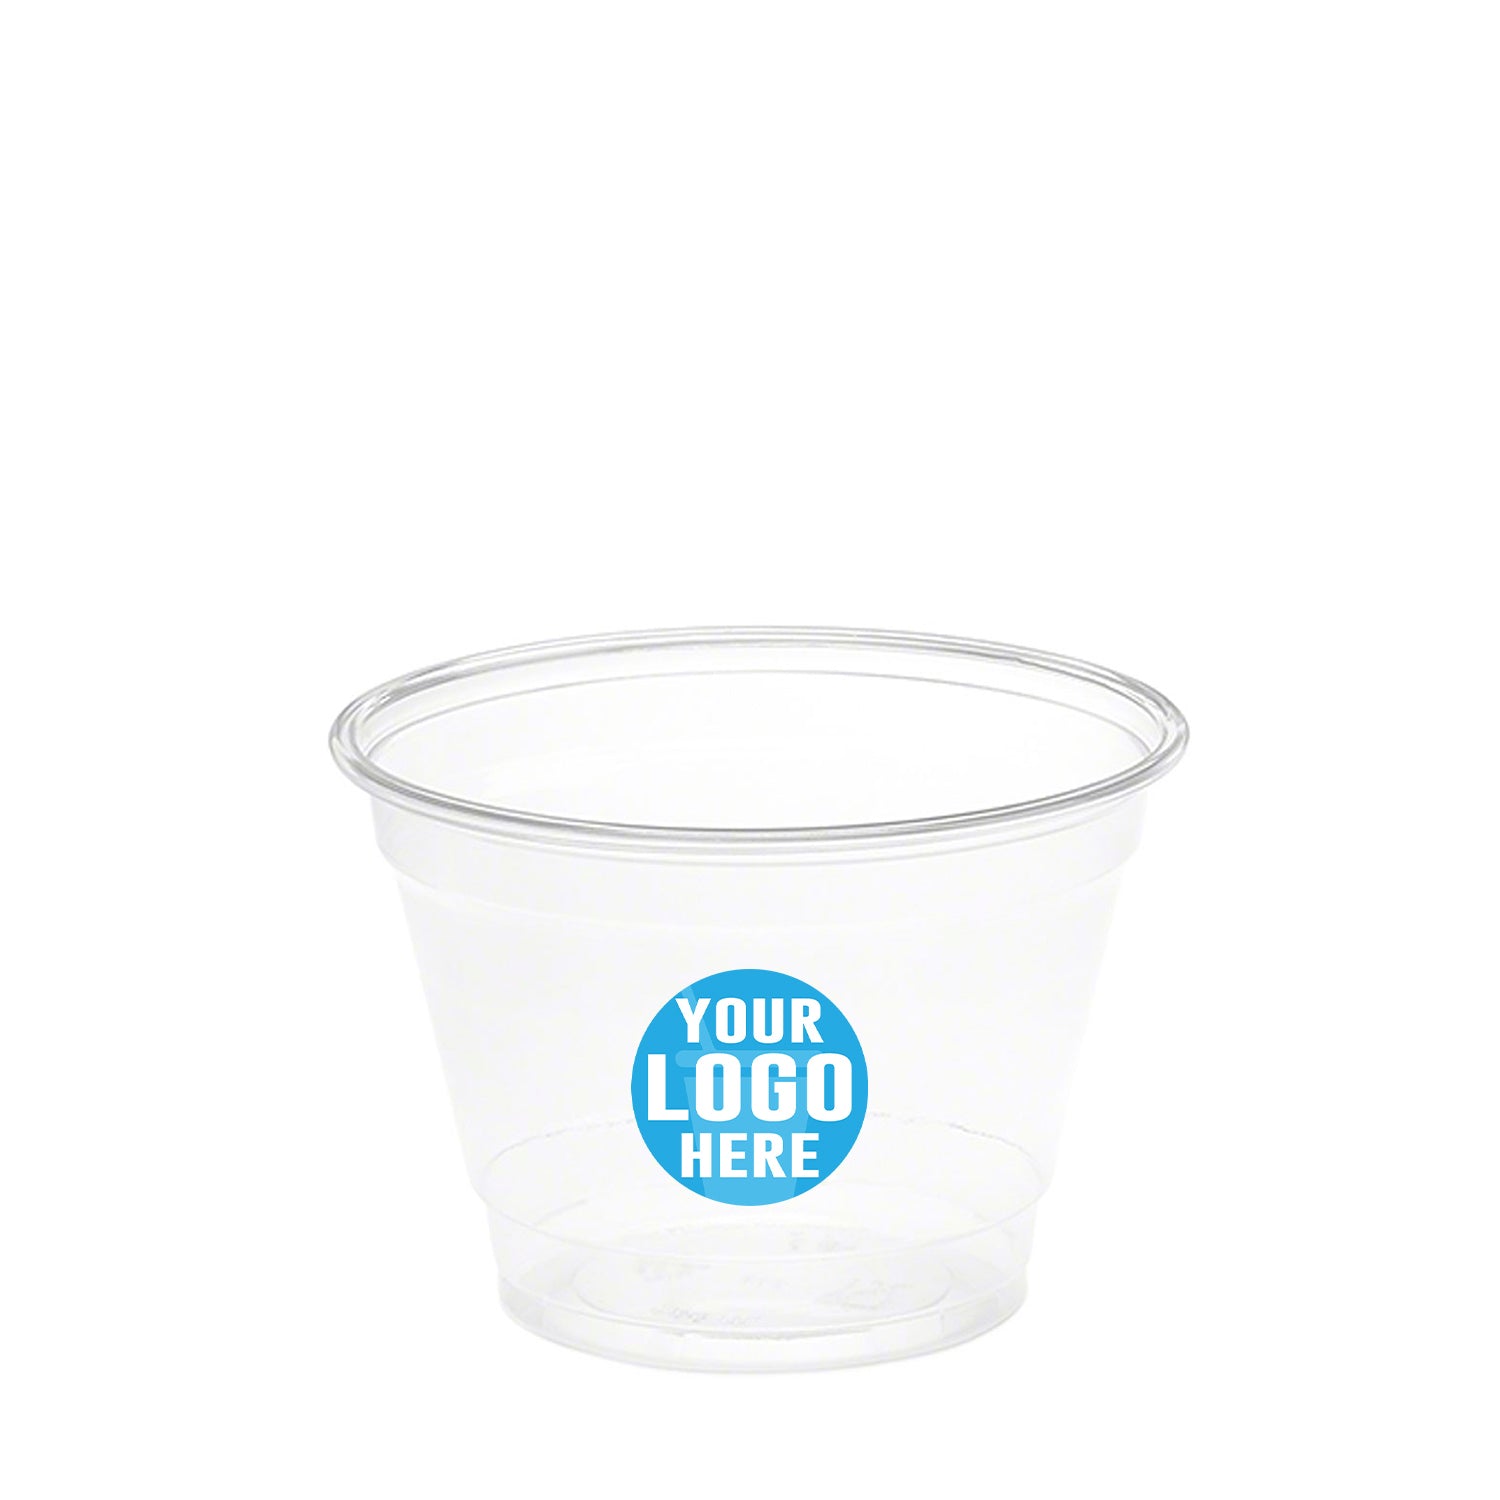 Visage Clear Plastic Top Hat 2-in-1 Straw or Sippy Cup Lid - Fits 9, 12 and 16 oz - 1000 Count Box